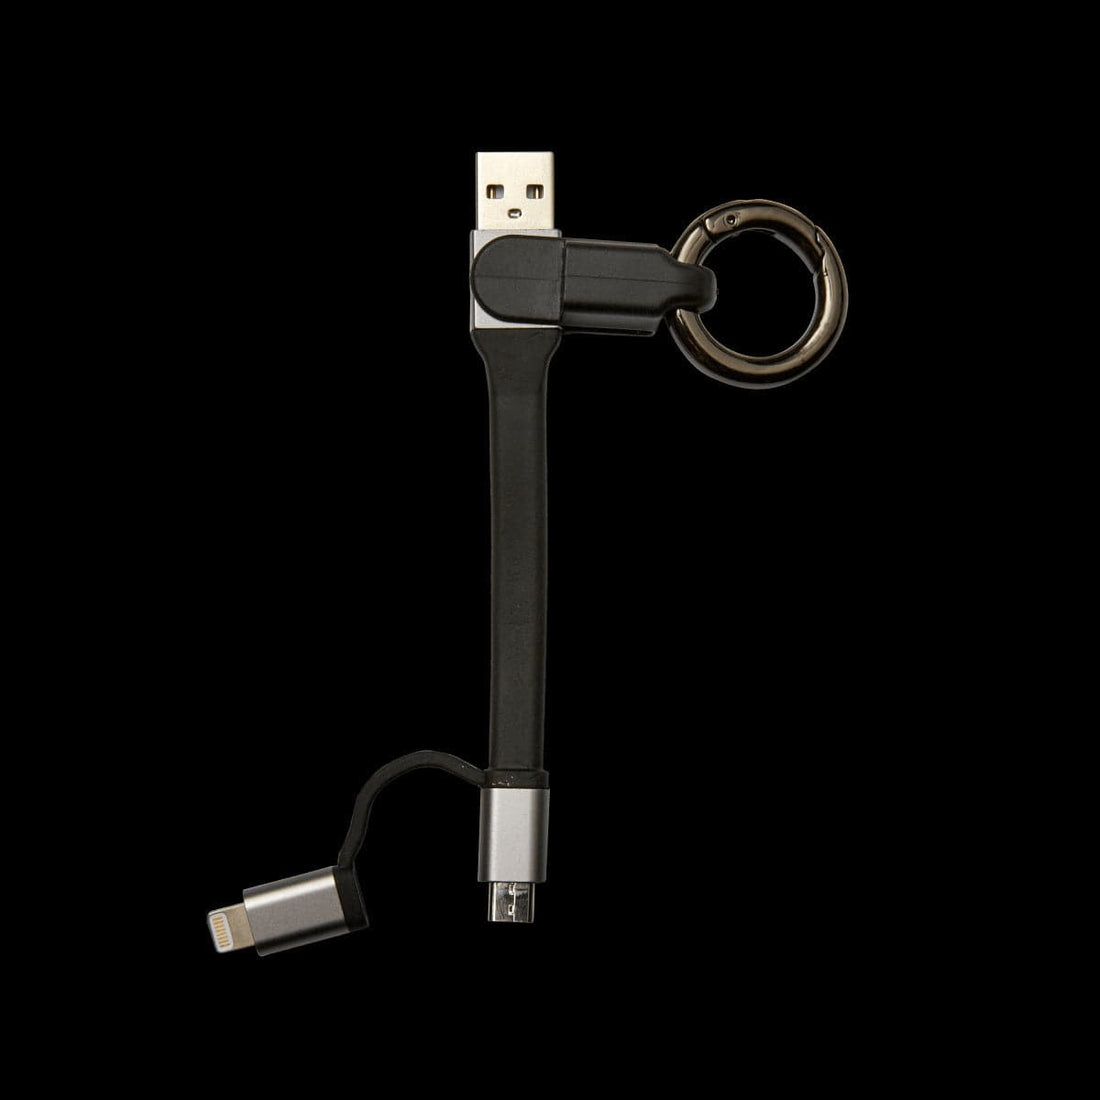 TYPE A USB /MICRO USB KEYRING CABLE + LIGHTNING ADAPTER - best price from Maltashopper.com BR420005308